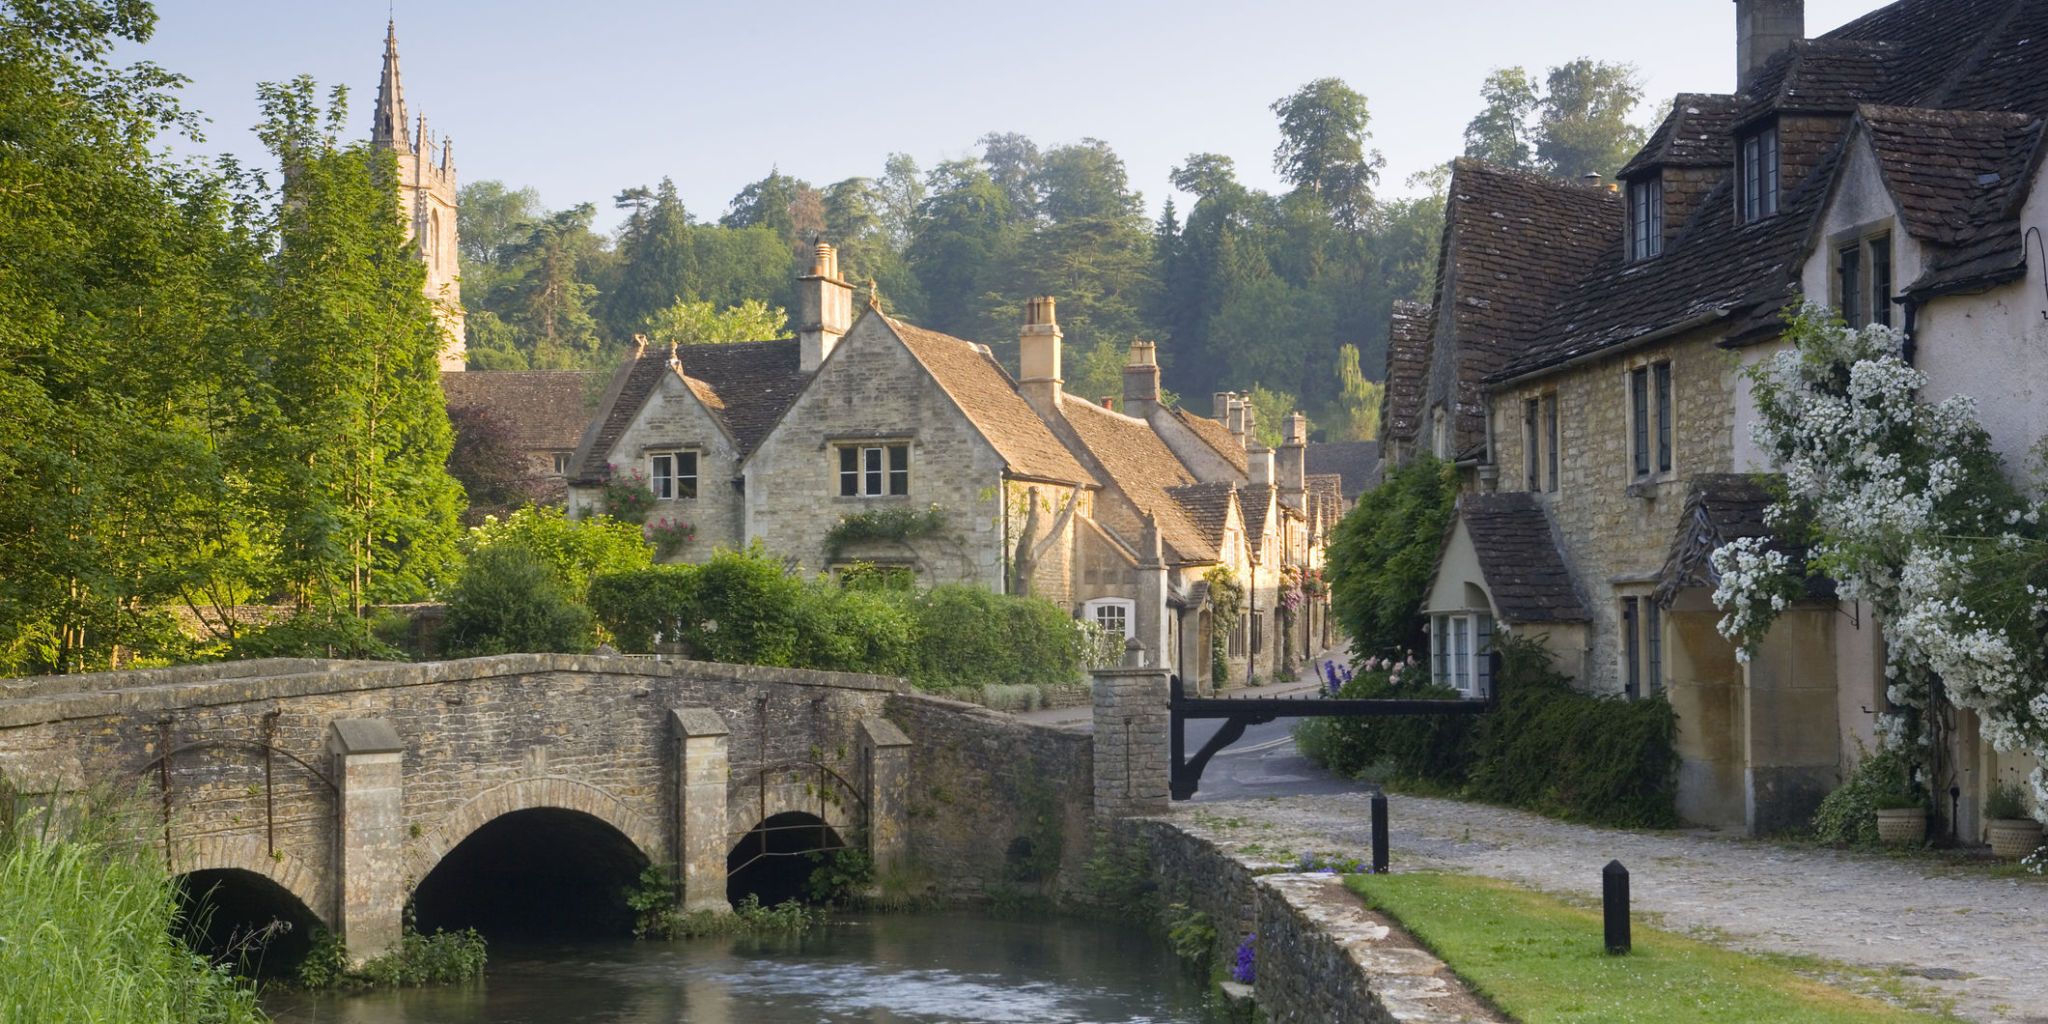 This is what makes the perfect British village